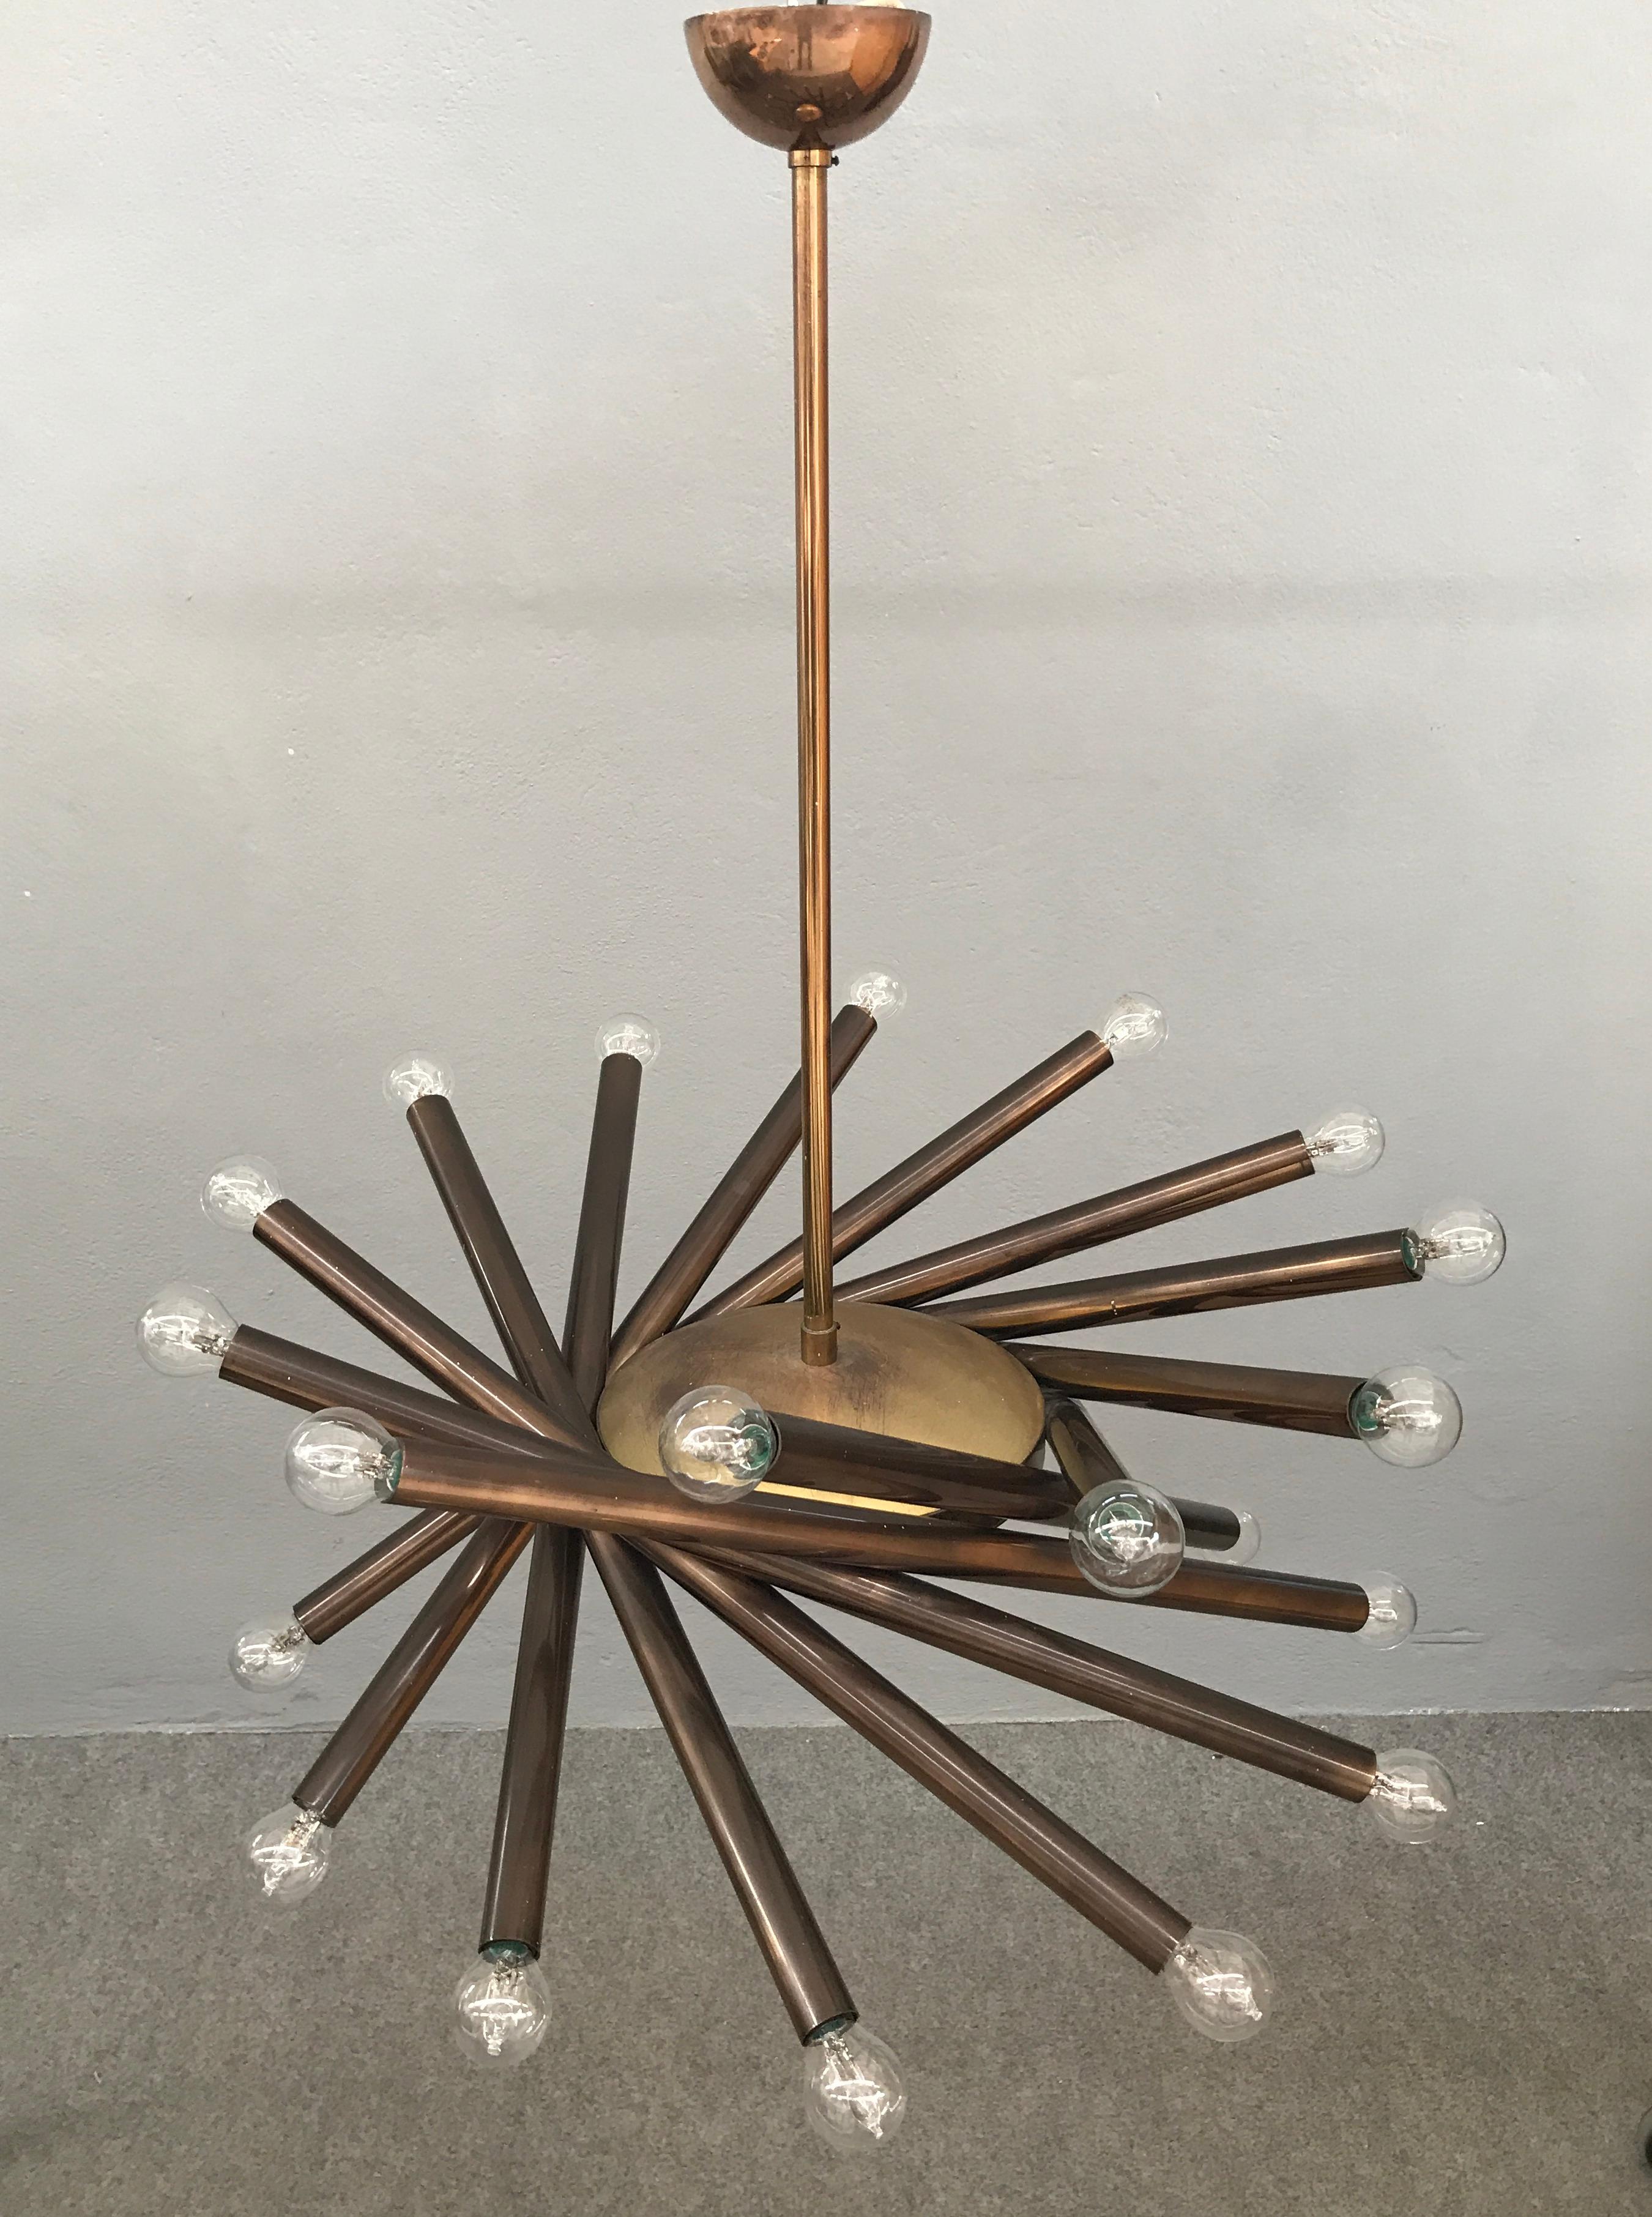 Rare brass chandelier with 24 lights and central solid brass round dish by Stilnovo, circa 1950.